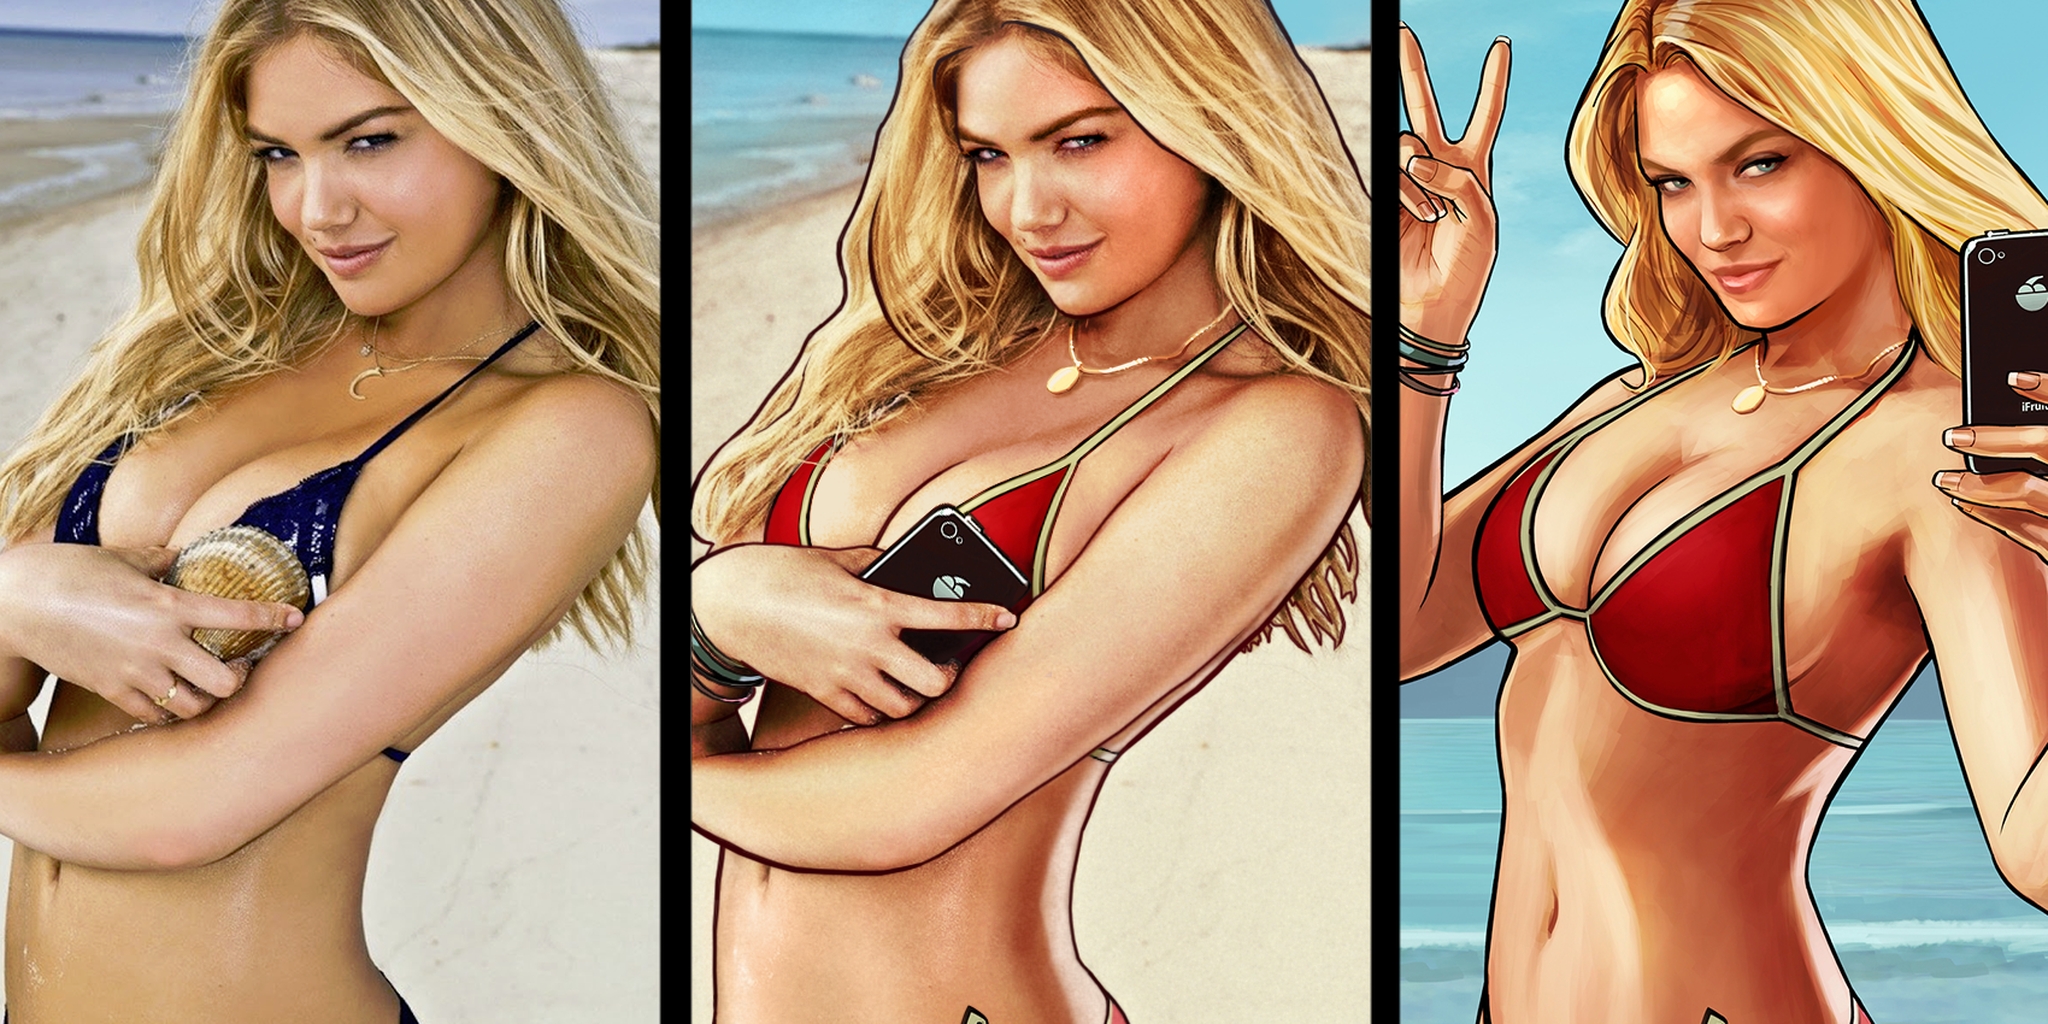 Thats not Kate Upton in the Grand Theft Auto V ads—its this model image pic